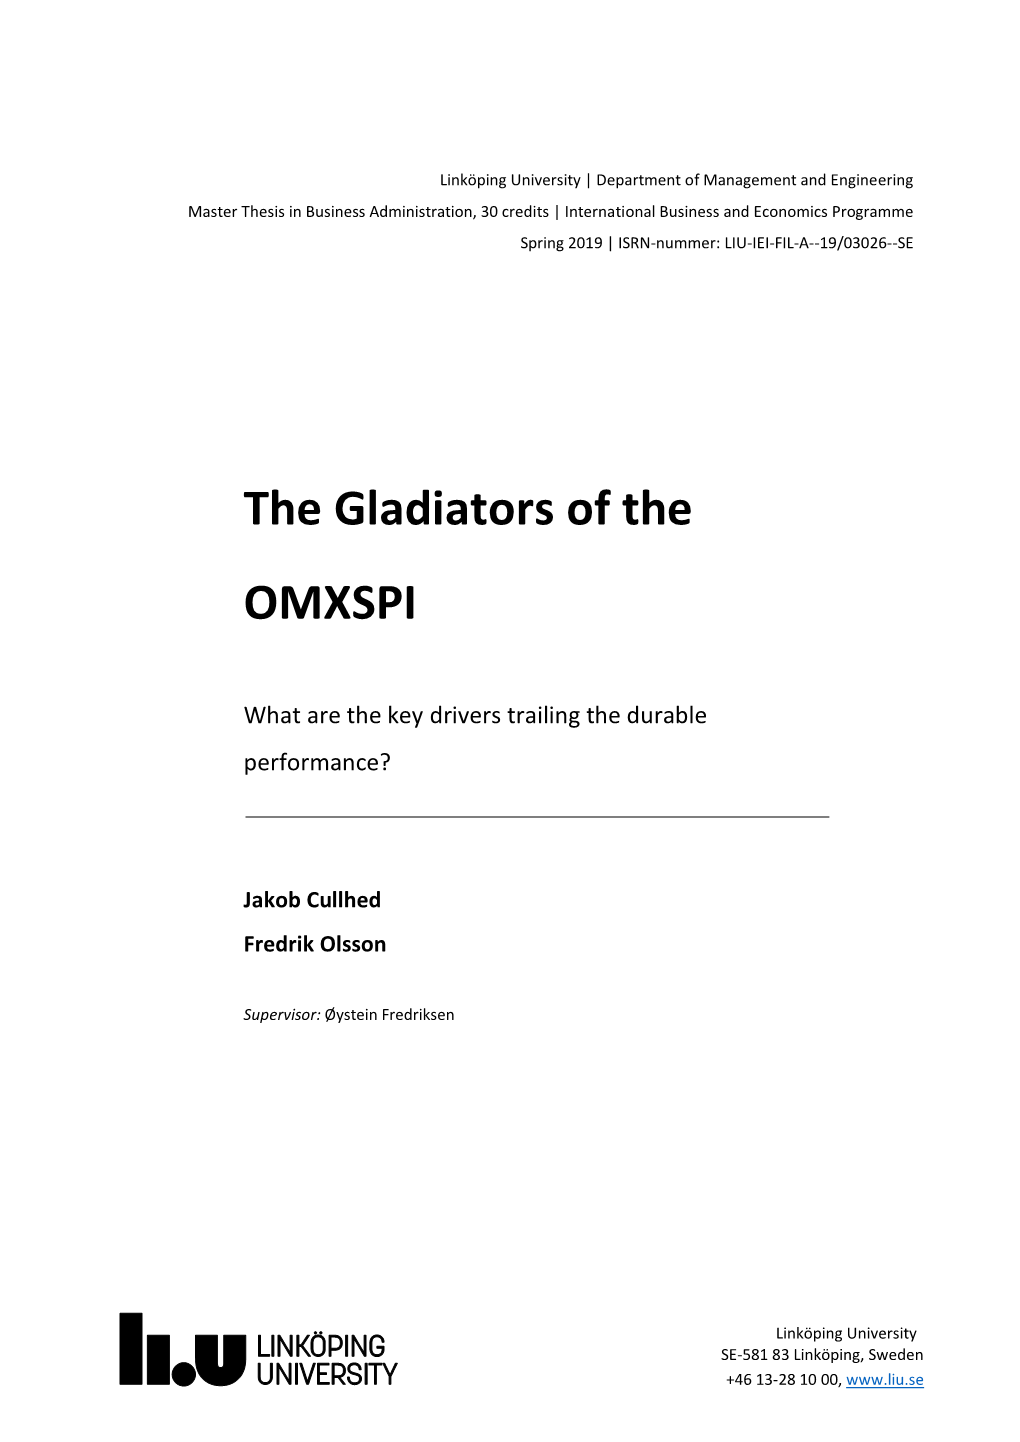 The Gladiators of the OMXSPI – What Are the Key Drivers Trailing the Durable Performance?